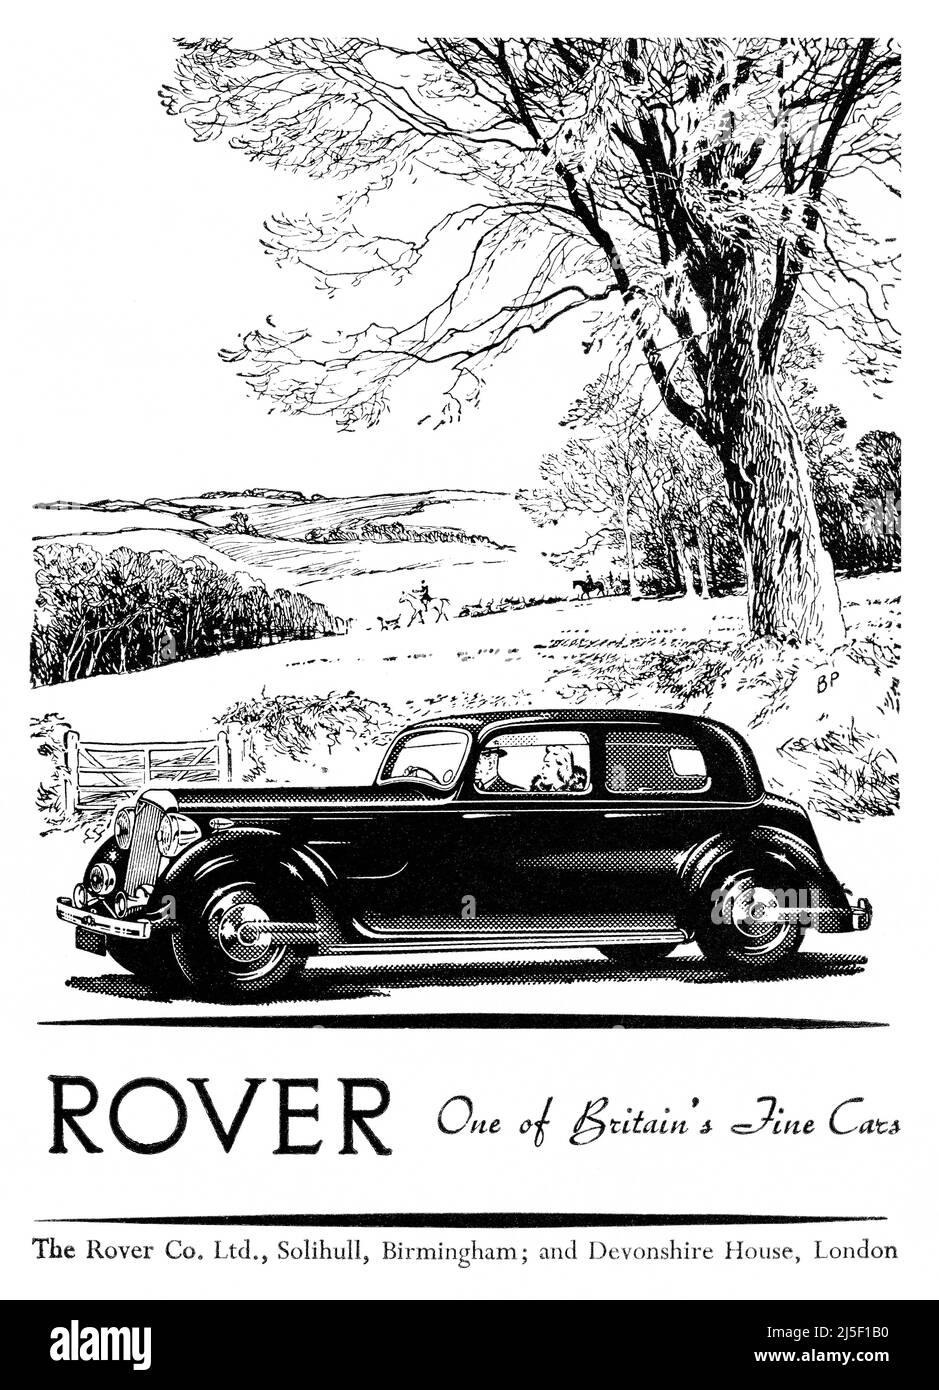 1947 British advertisement for Rover motor cars. Stock Photo